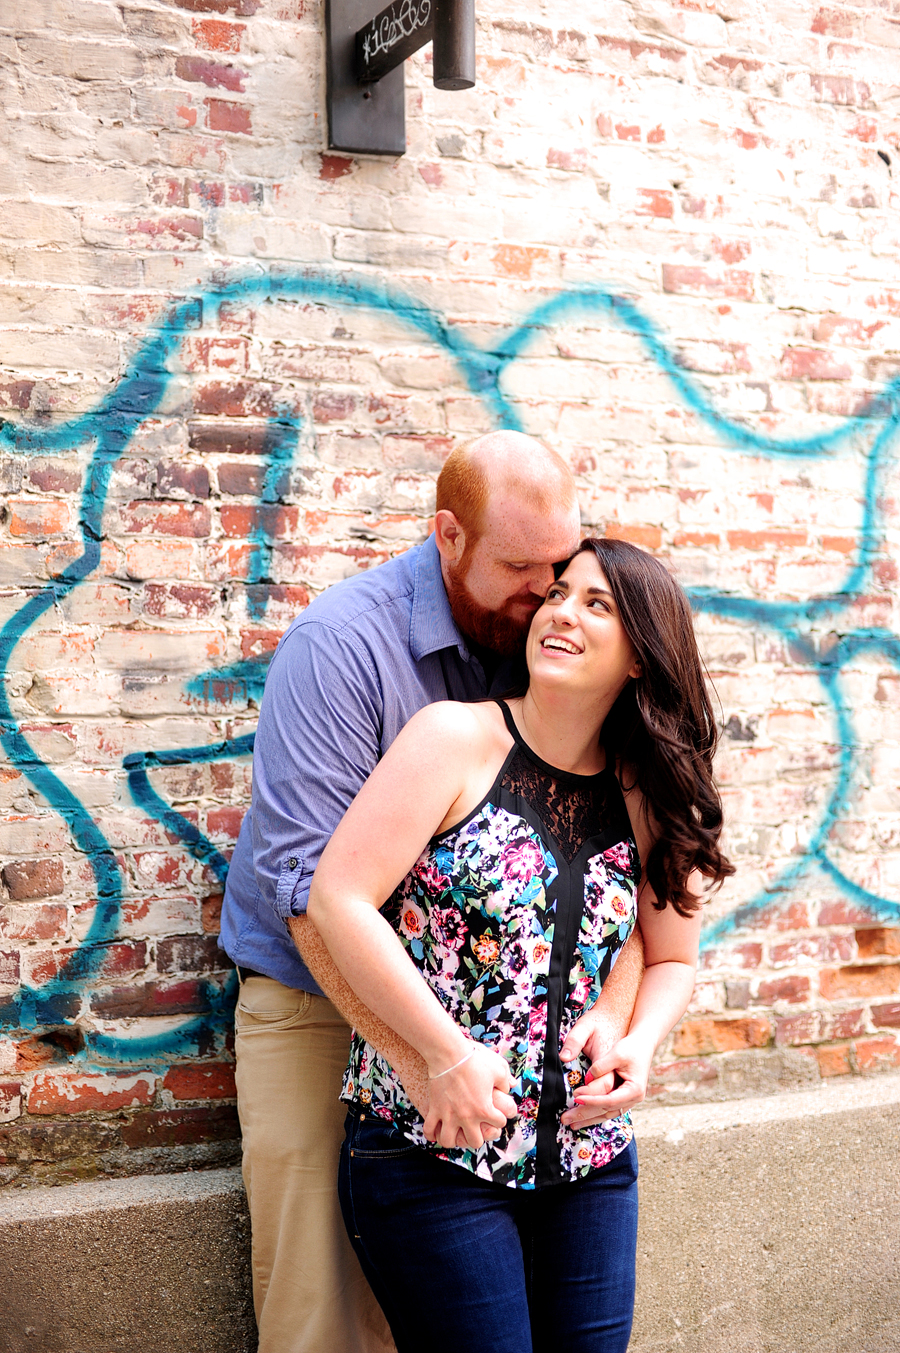 engagement photos in front of a brick wall with graffiti